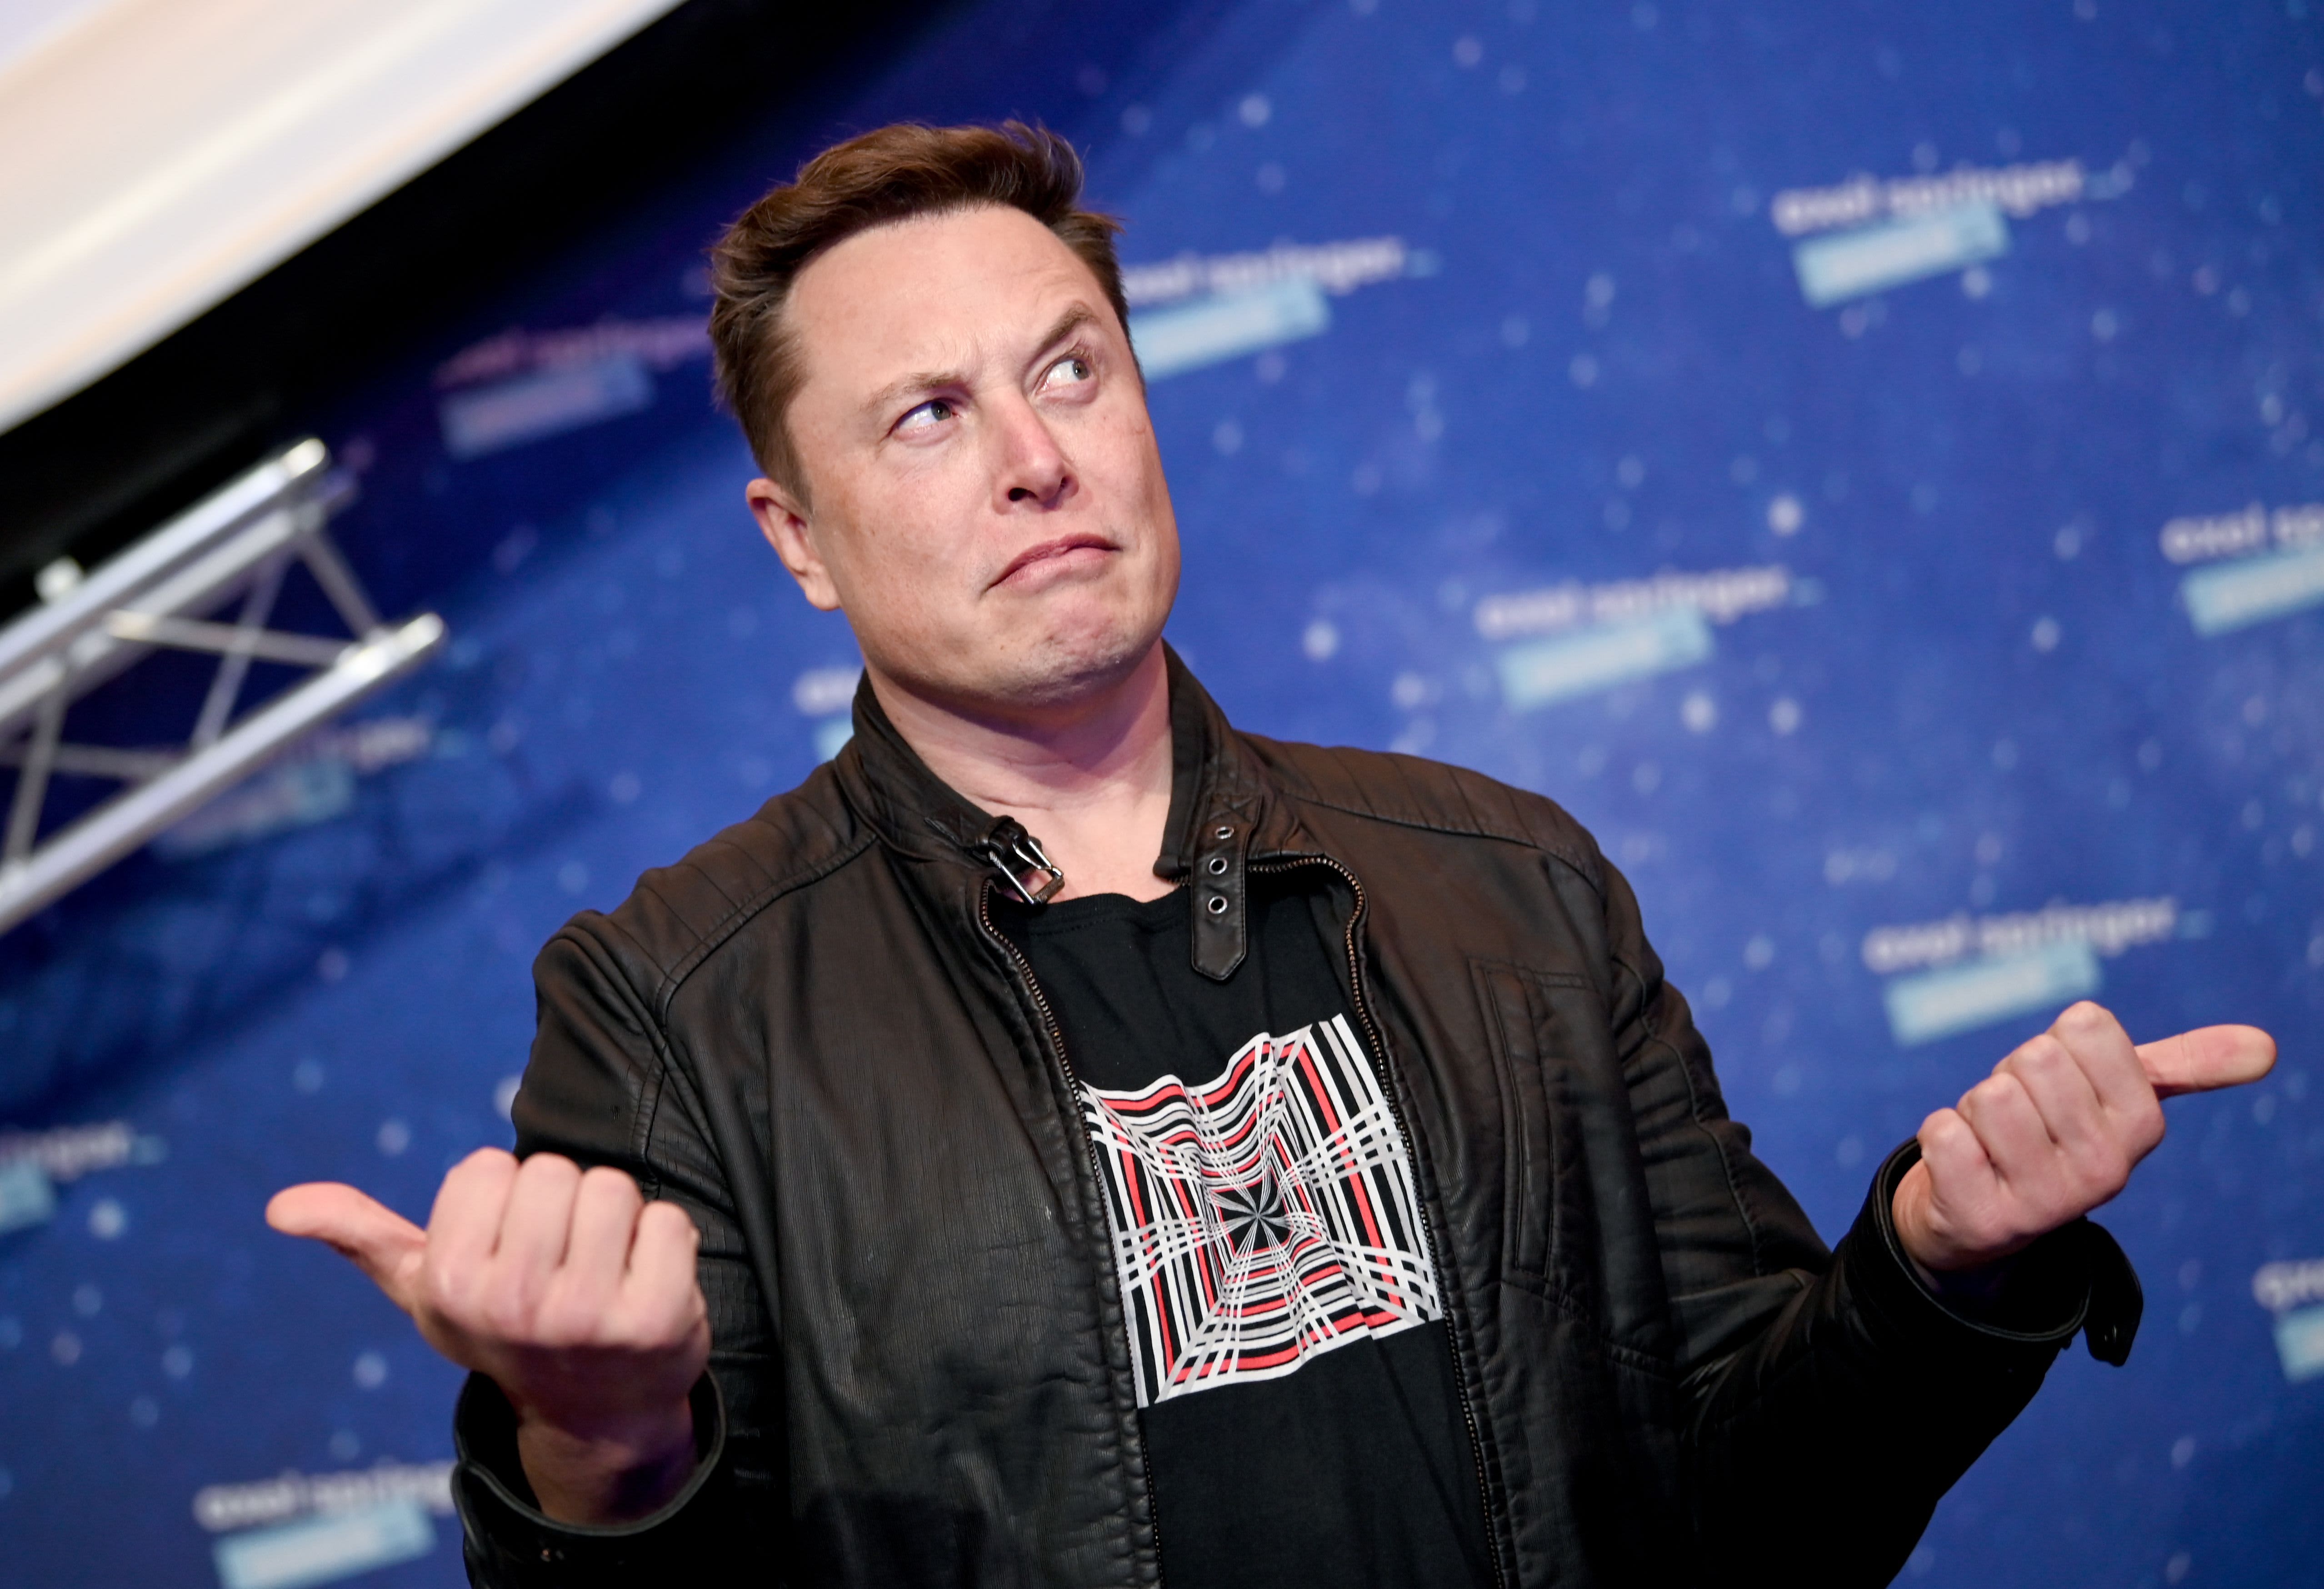 Elon Musk offers to sell his tweet as NFT